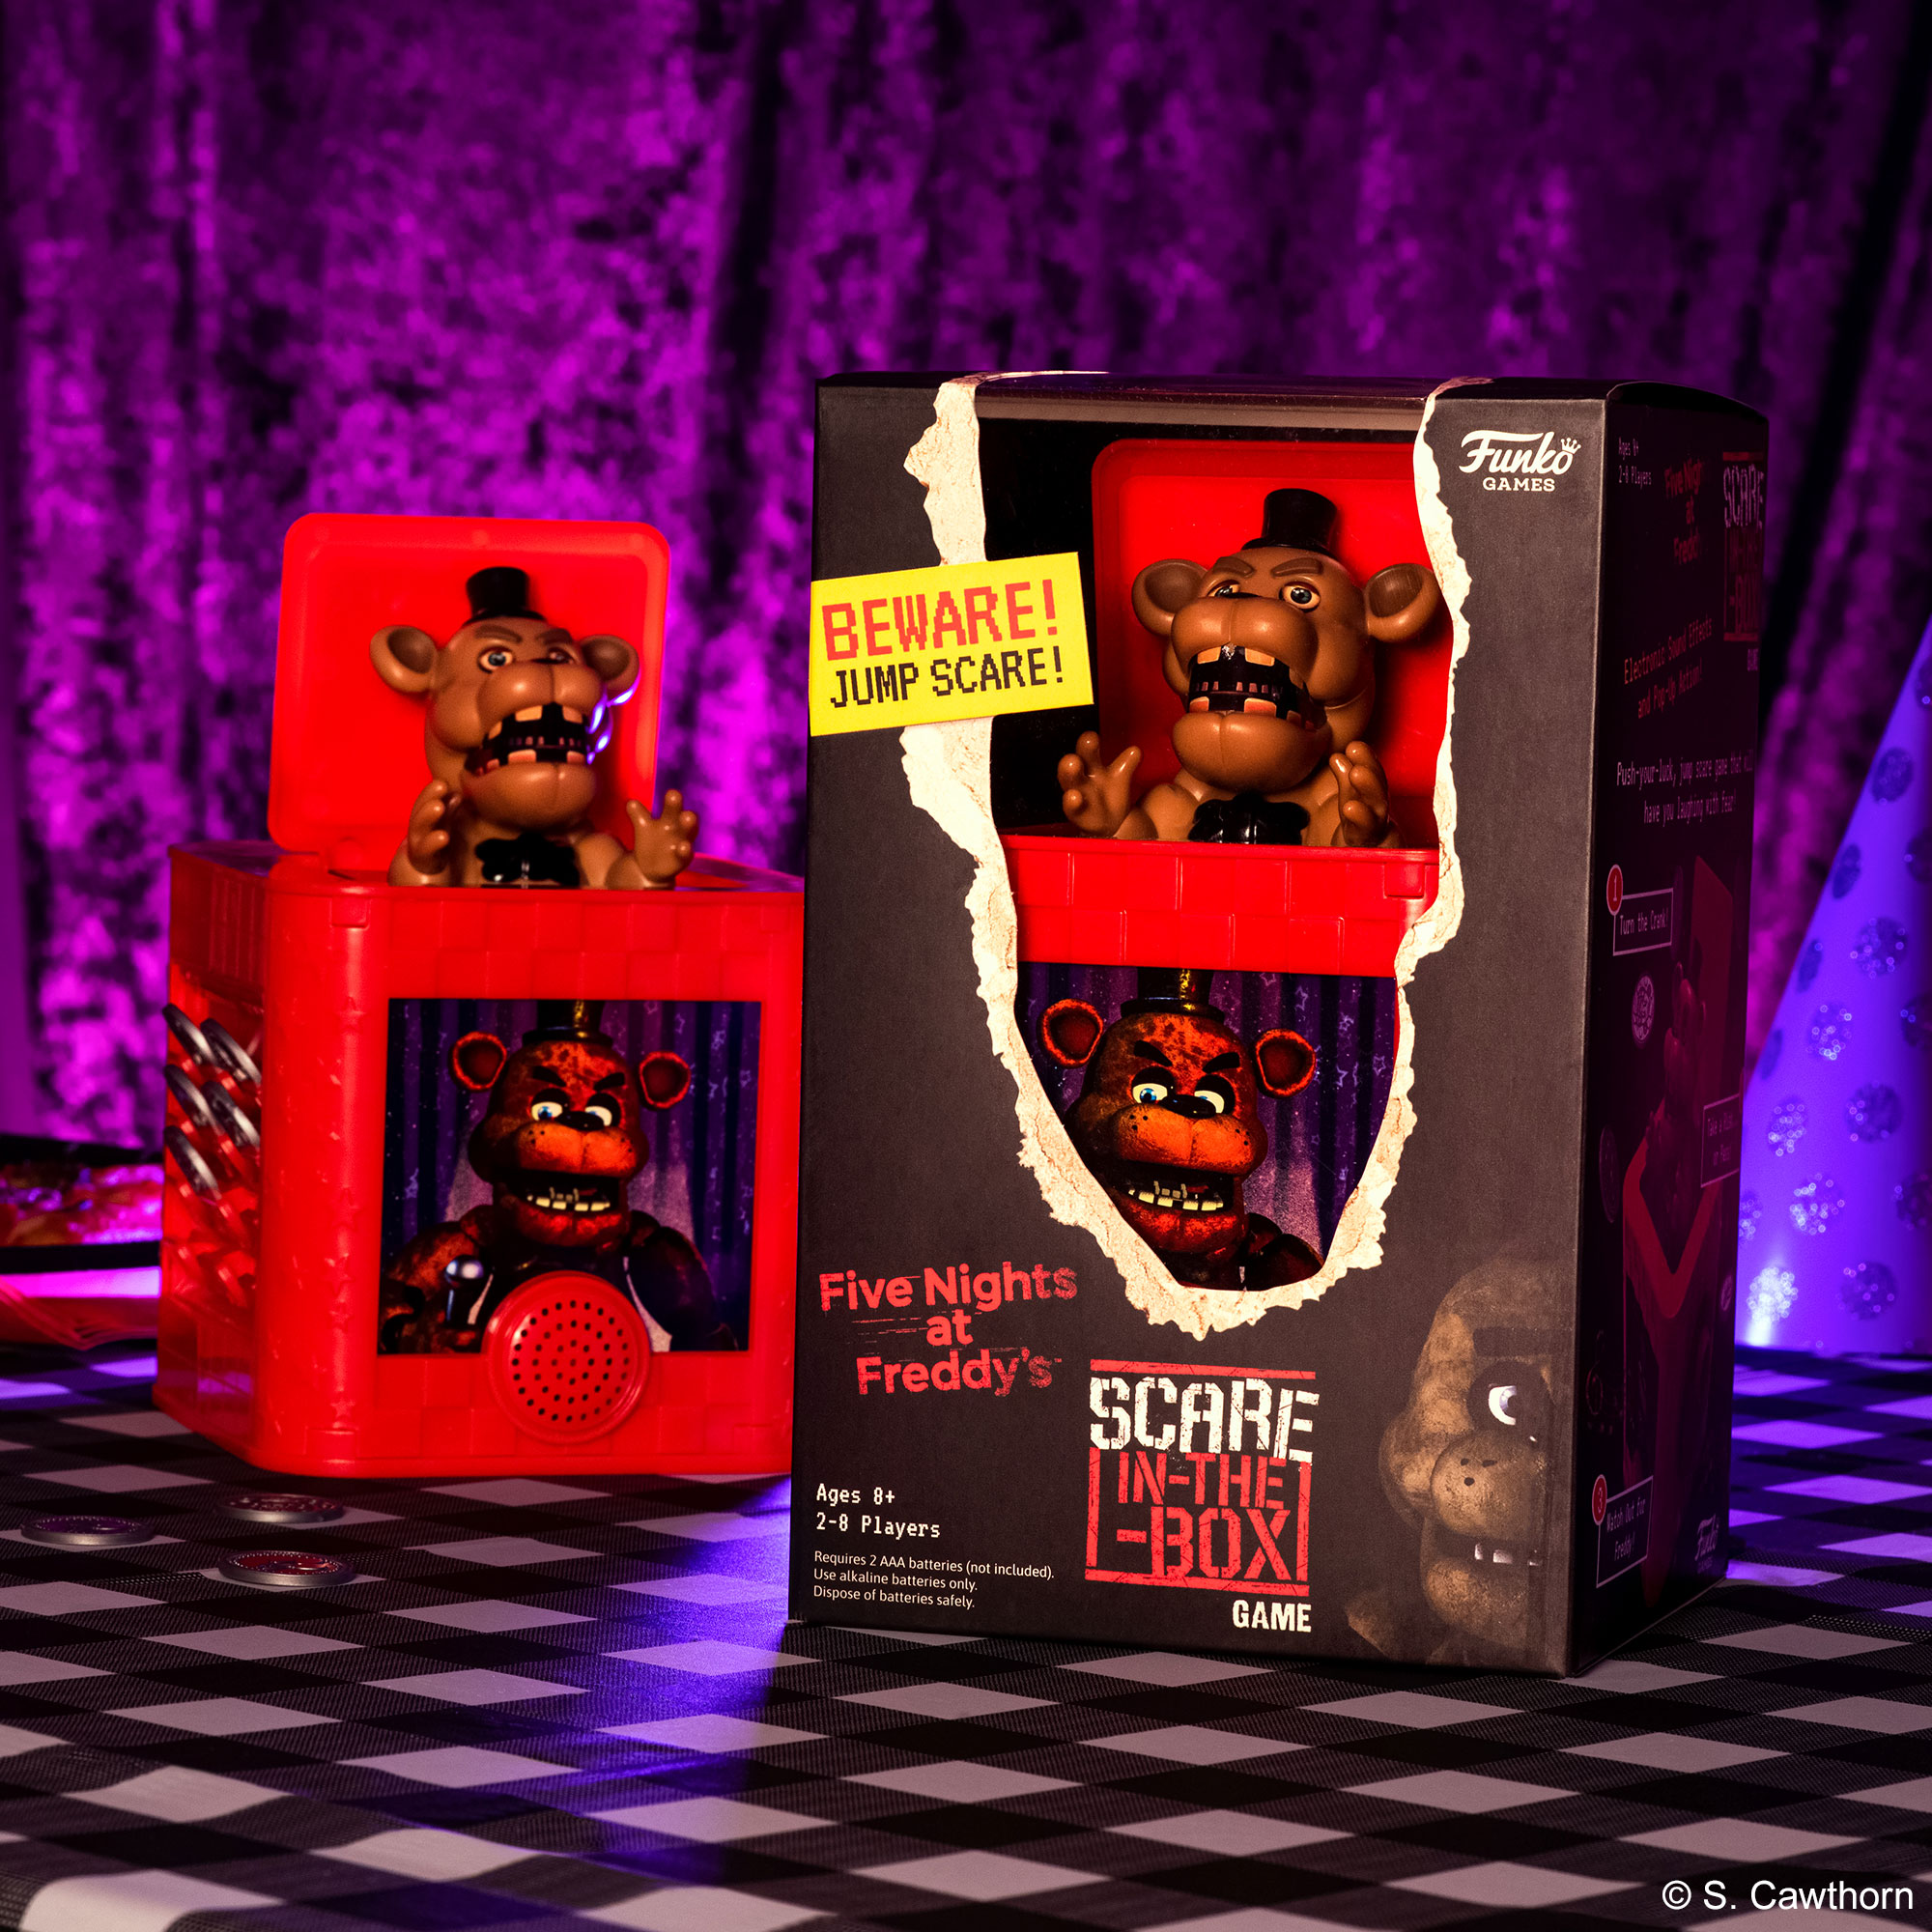 Five Nights at Freddy's Scare-In-The-Box Game